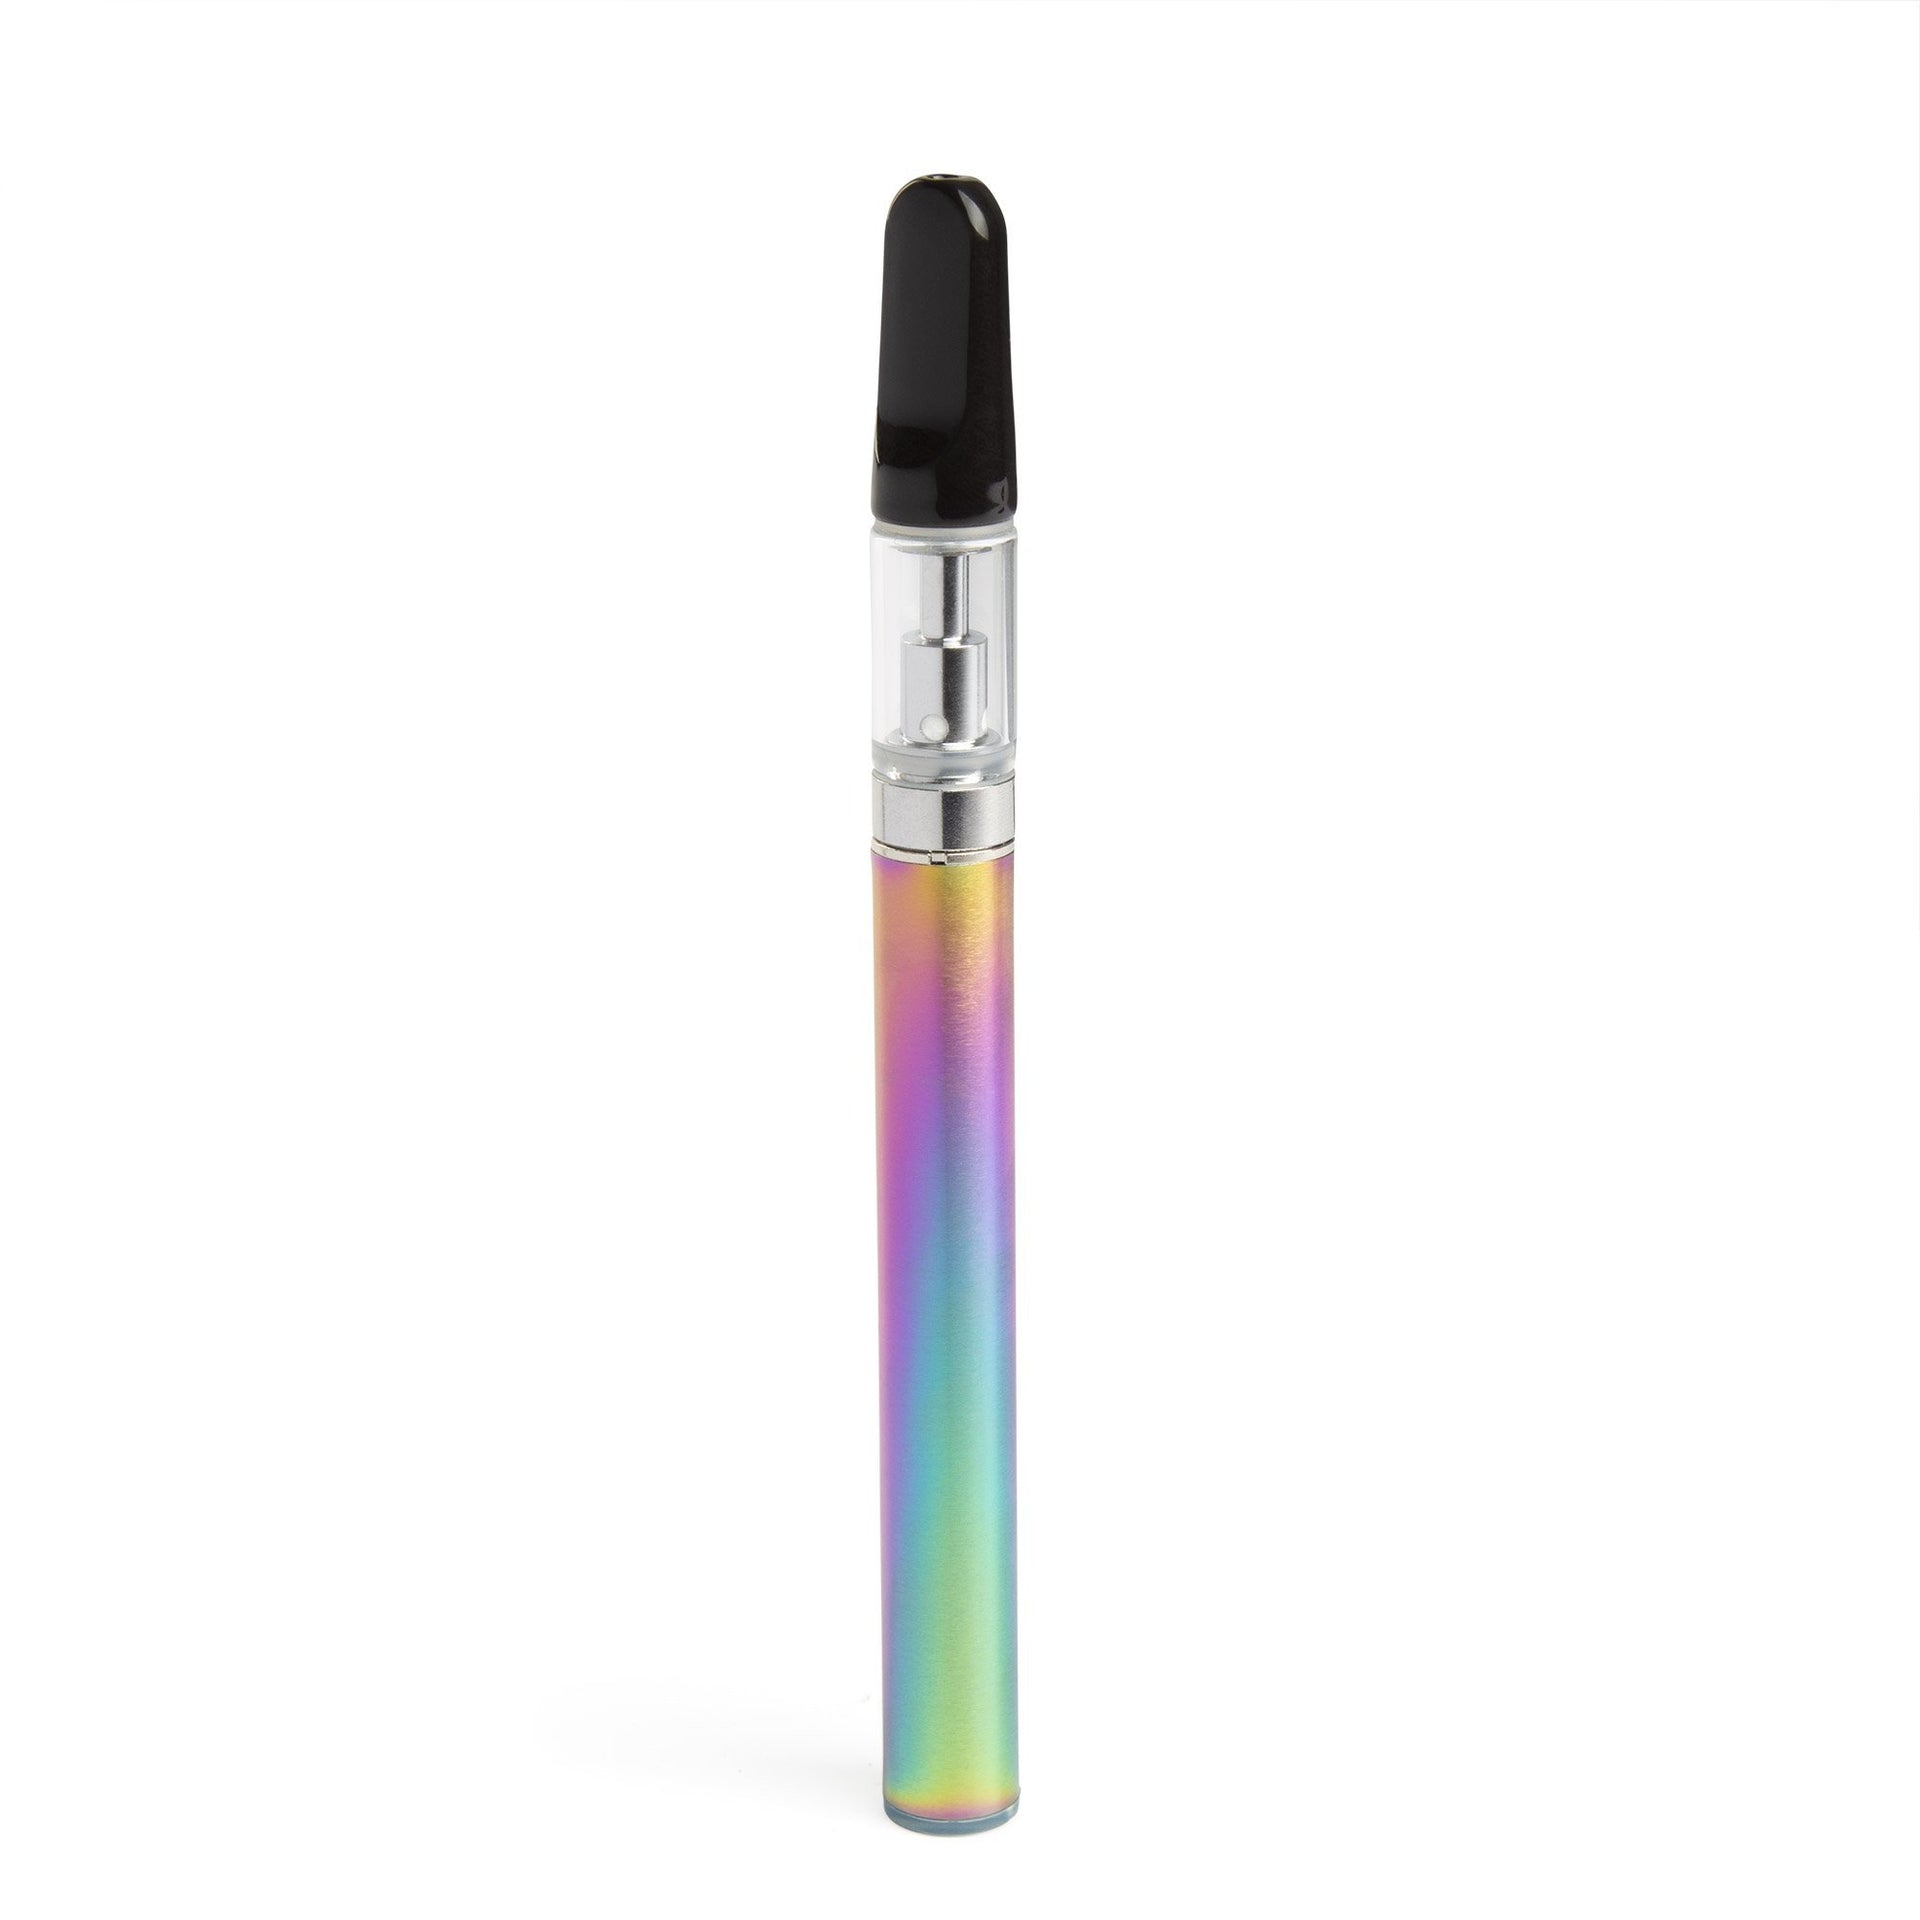 CCell M3 Cartridge Vape Battery - 420 Science - The most trusted online smoke shop.